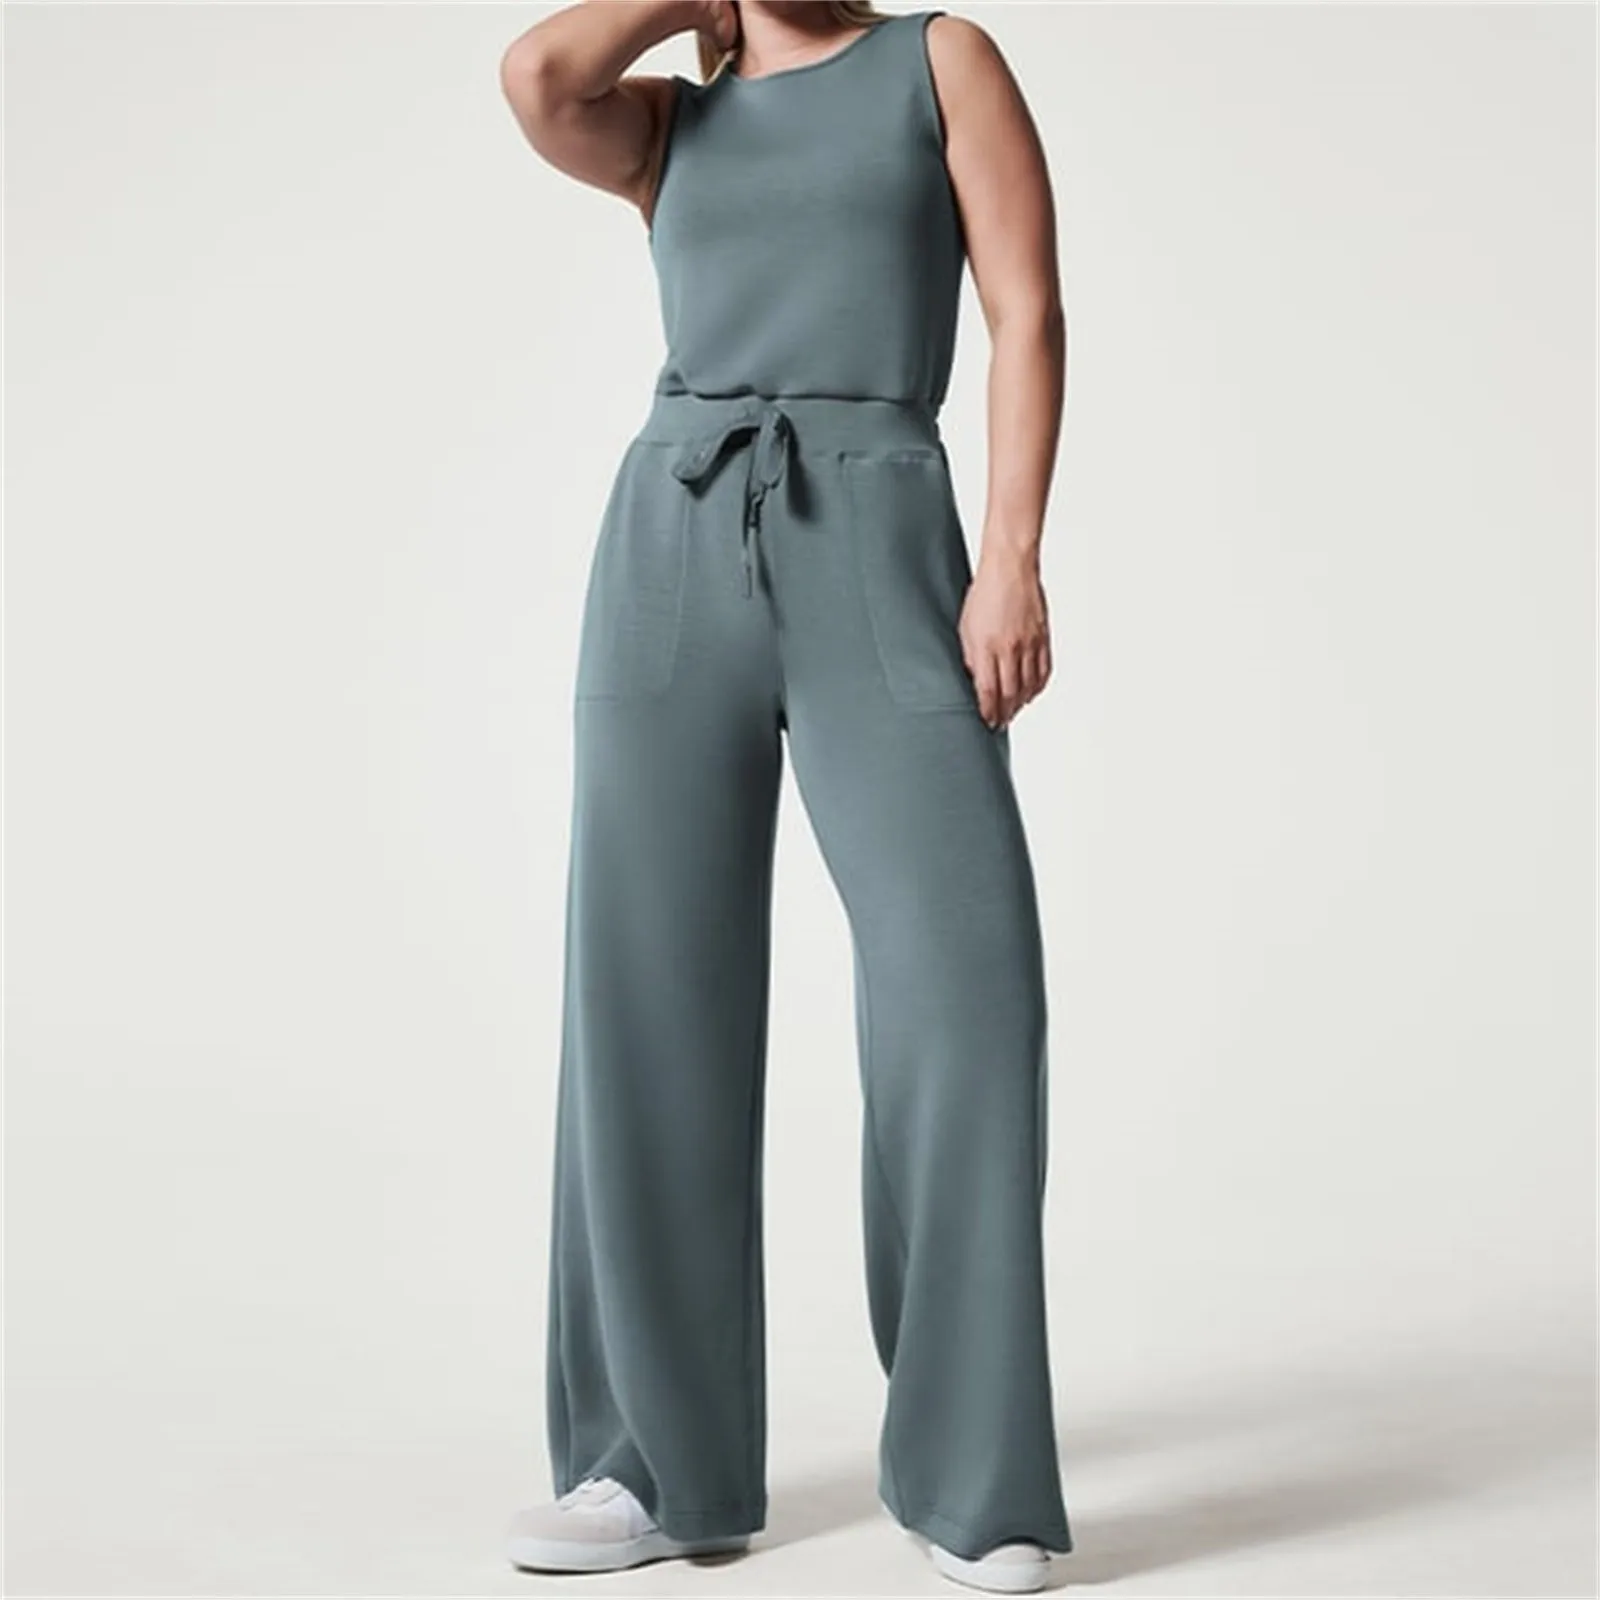 2023 New Jumpsuits for Women Casual Air Essentials Jumpsuit Ladies Summer Sleeveless Jumpsuit with Pockets Belted Wide Leg Pant